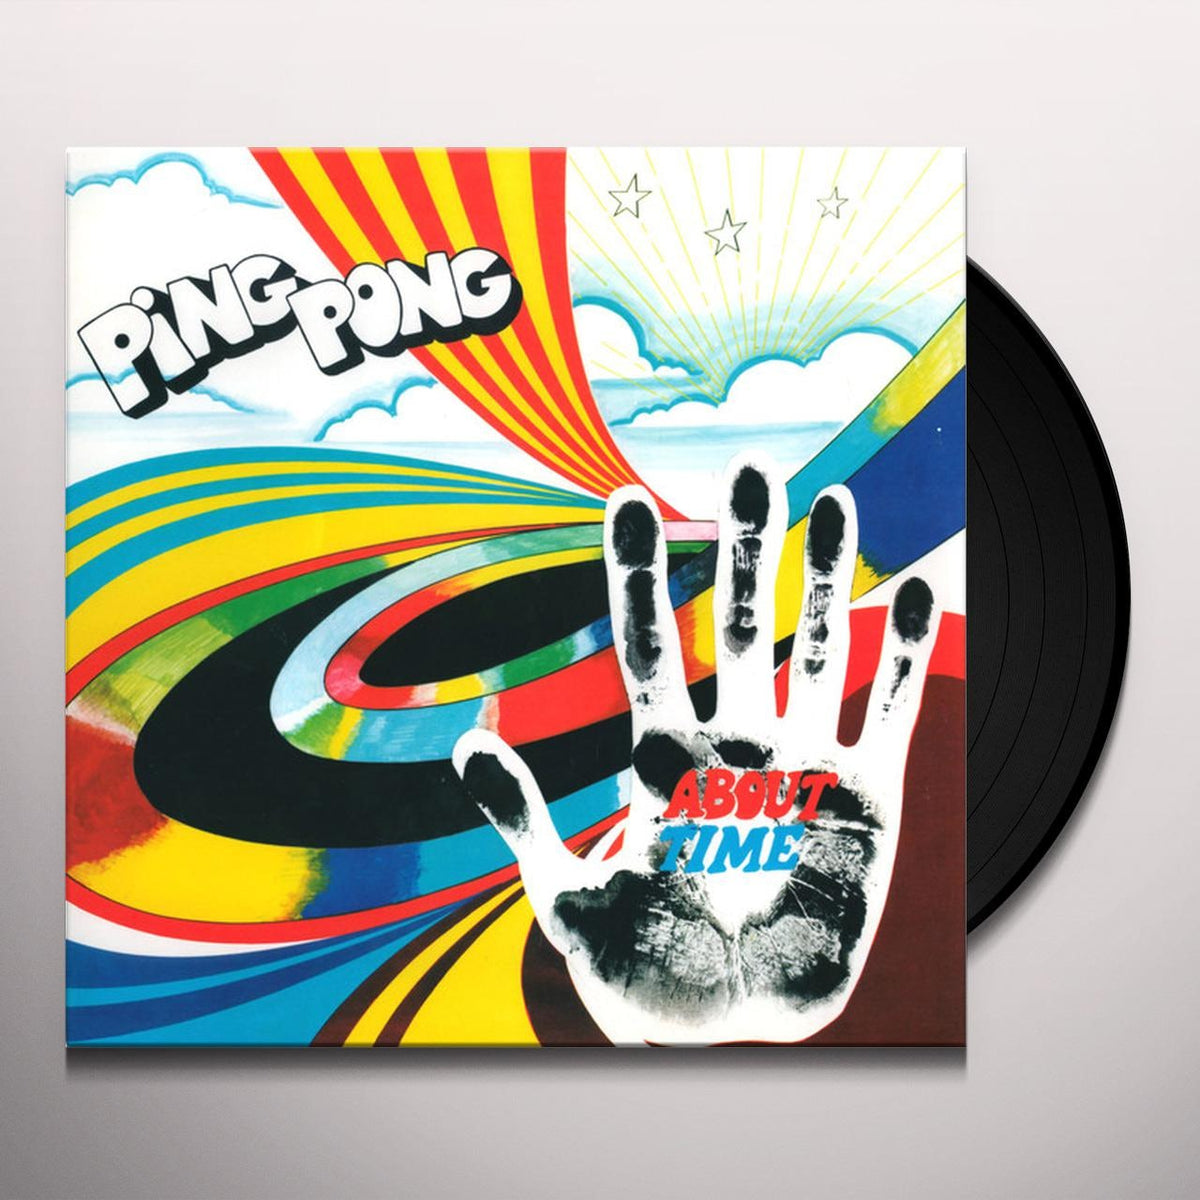 Ping Pong - About Time LP (Cinedelic Records Limited Edition Reissue)